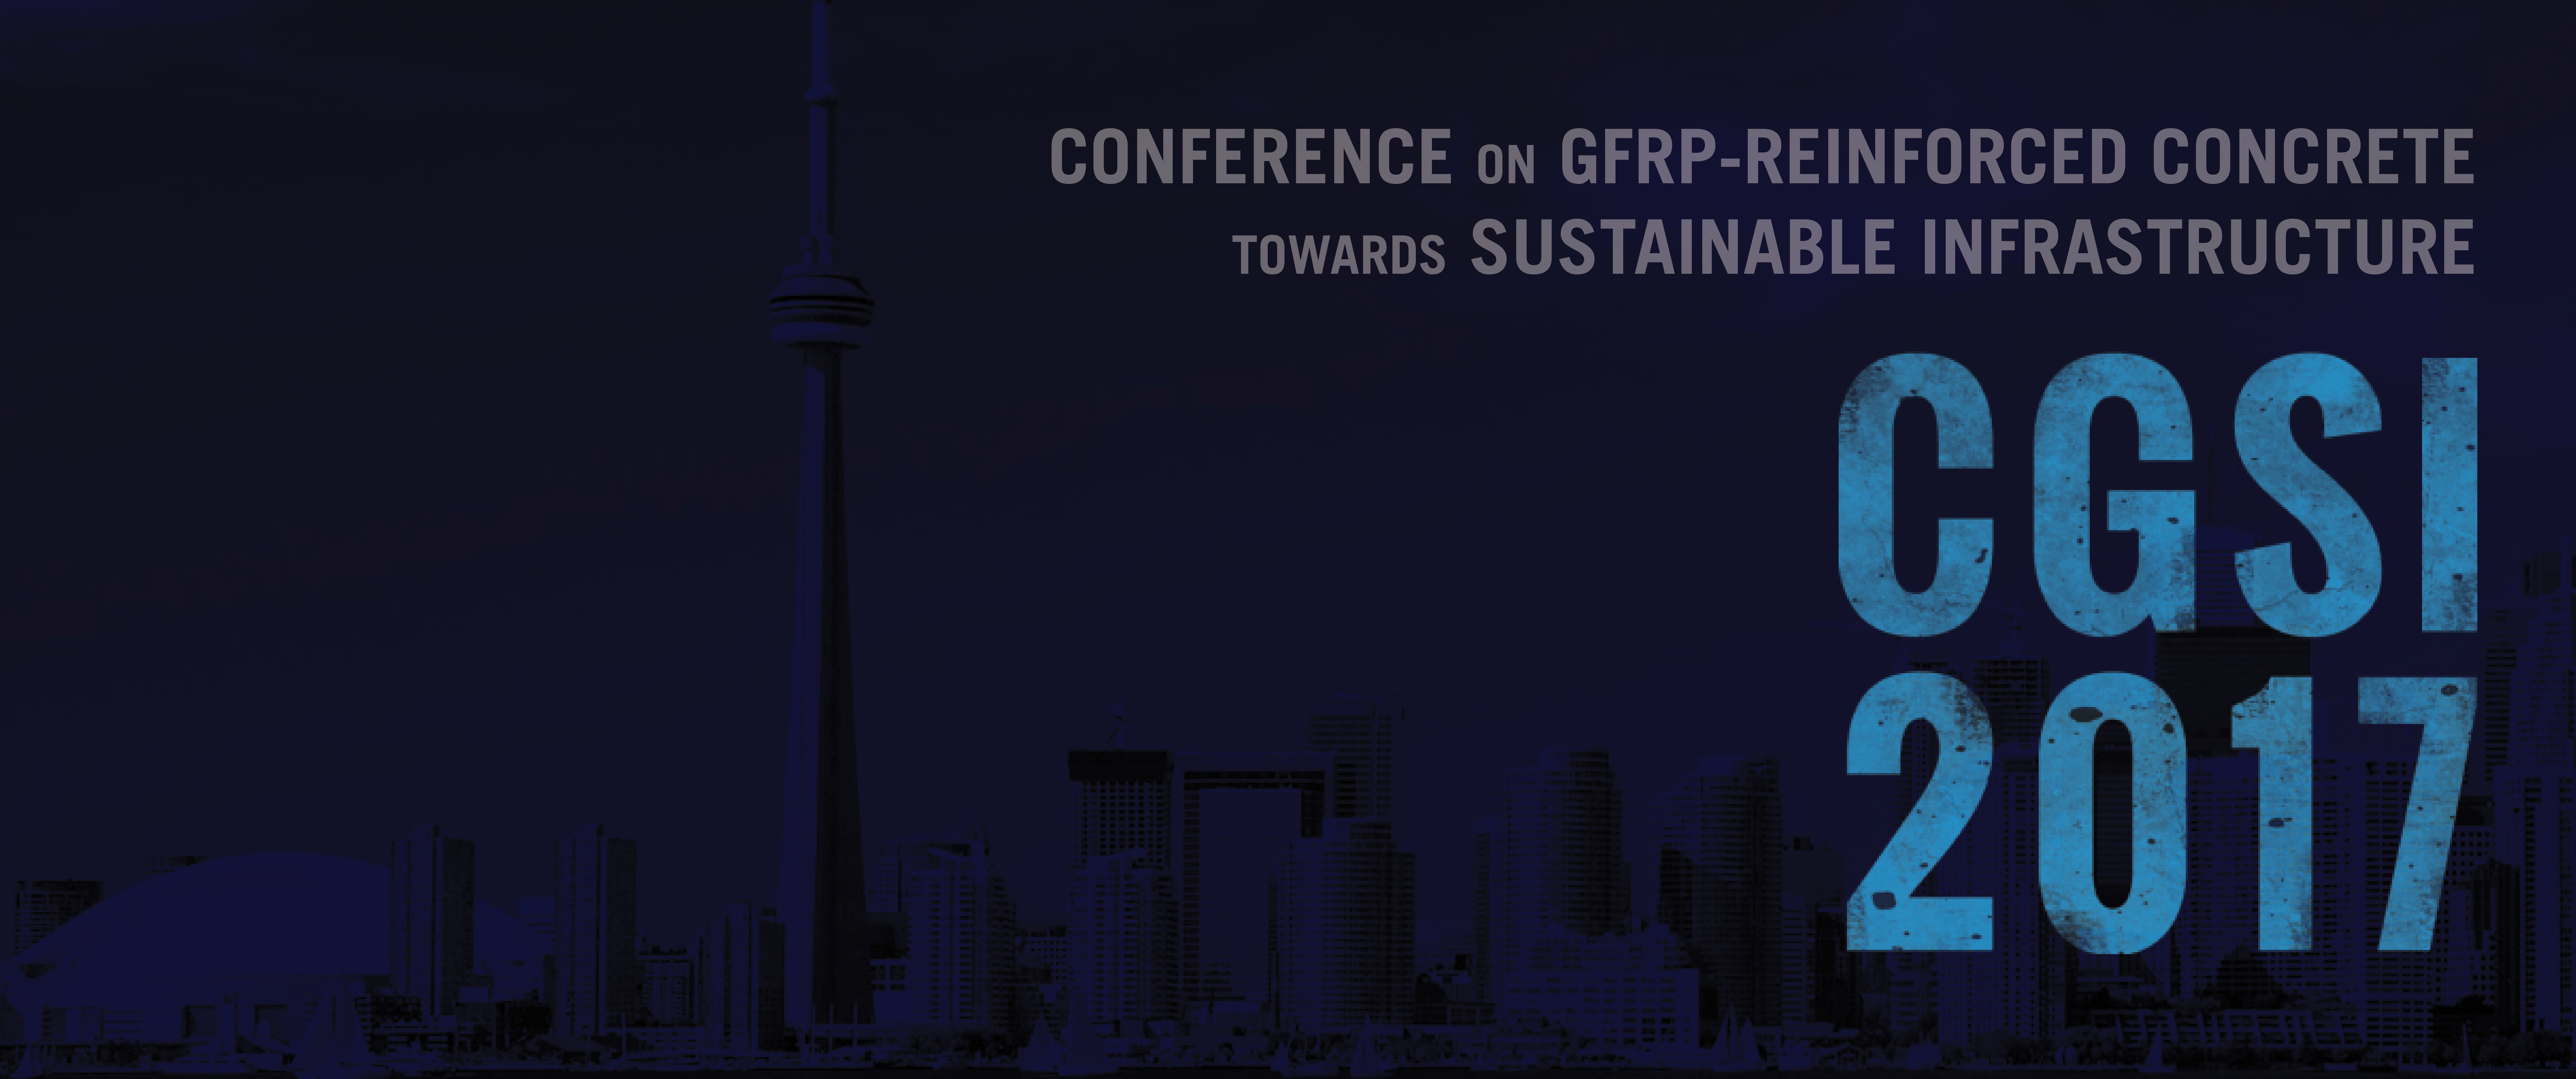 Conference on GFRP-Reinforced Concrete towards Sustainable Infrastructure